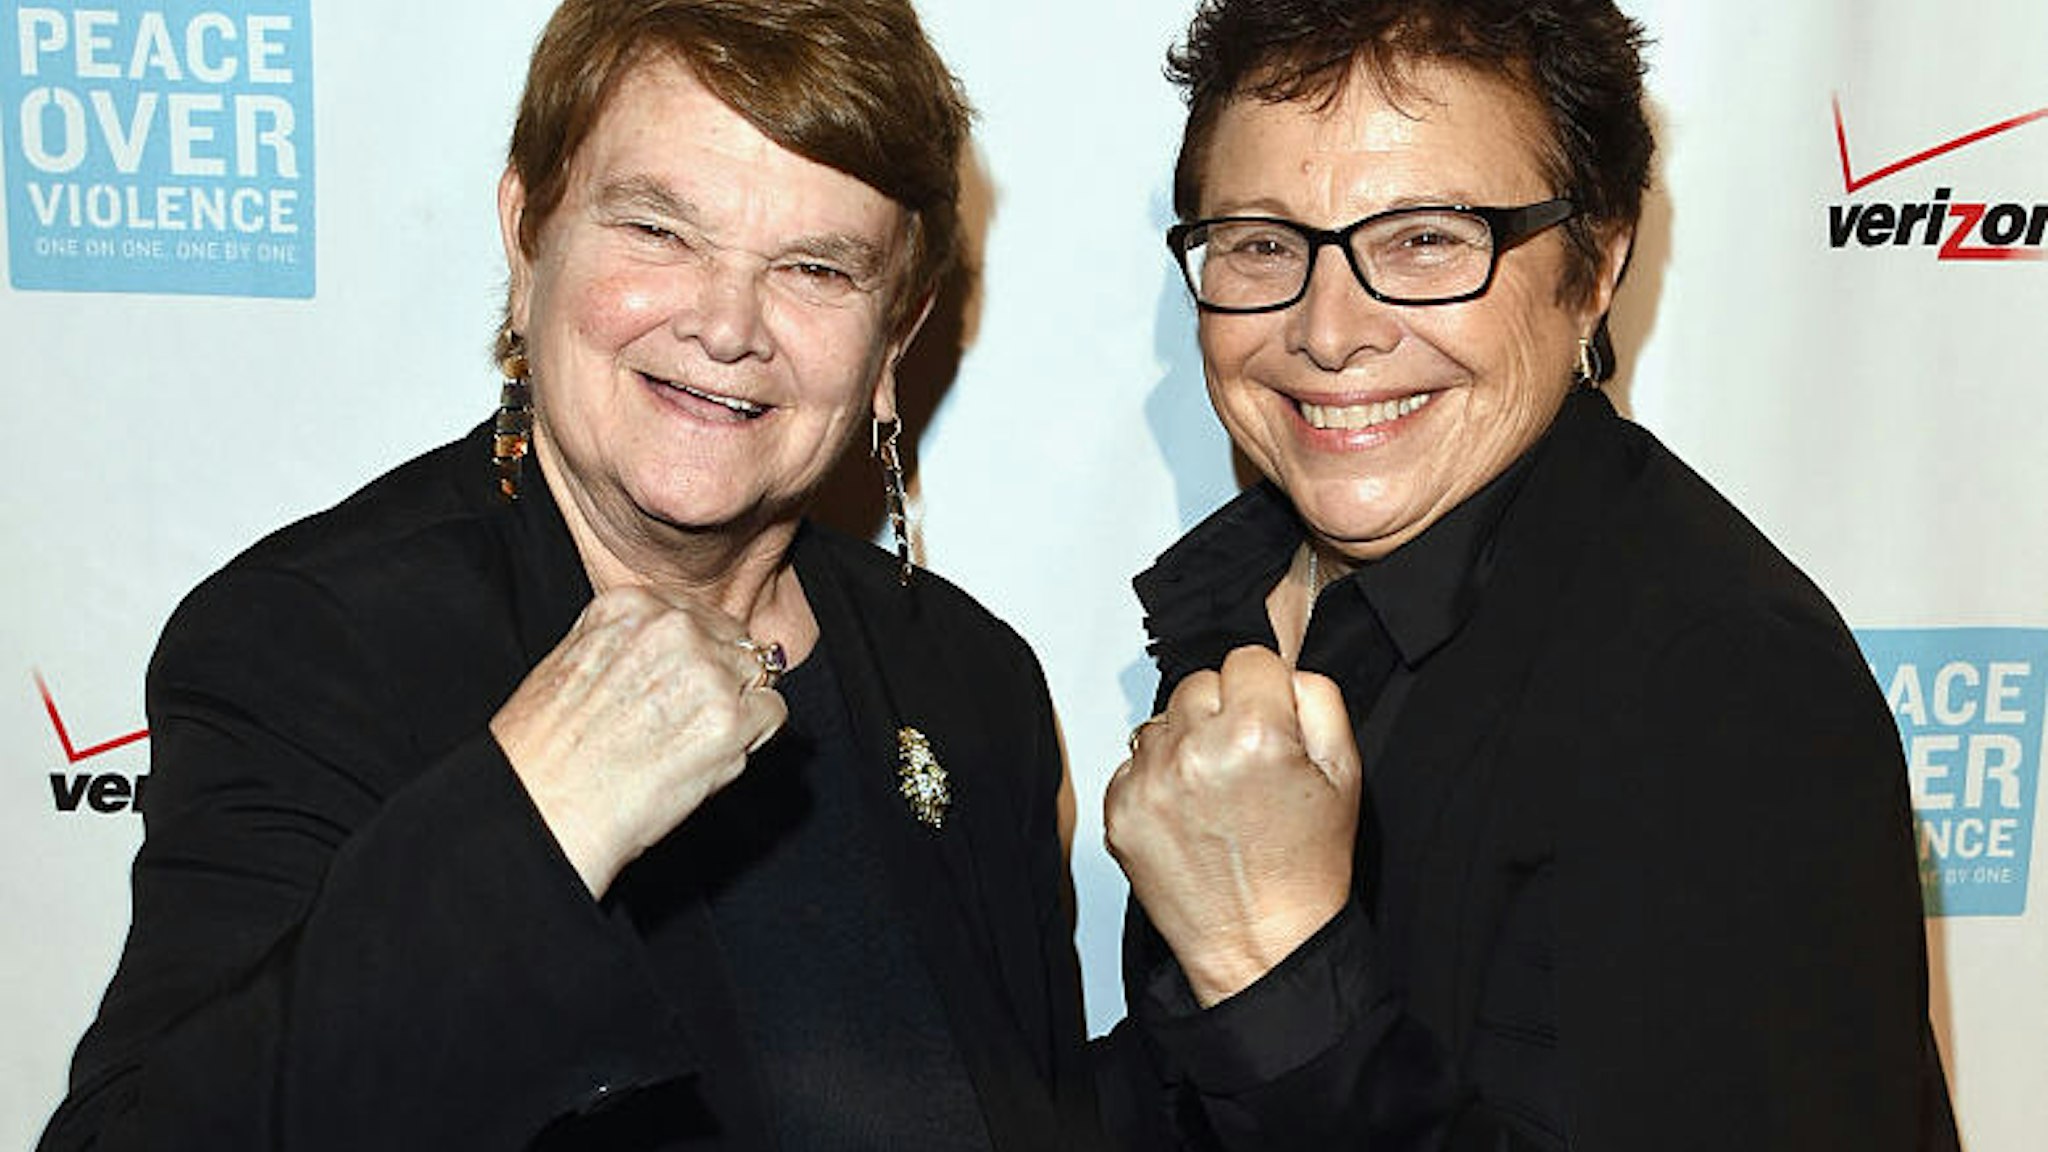 LOS ANGELES, CA - OCTOBER 16: LA County Board of Supervisors Sheila Kuehl and Executive Director of Peace Over Violence Patti Giggans attend The 44th Annual Peace Over Violence Humanitarian Awards at Dorothy Chandler Pavilion on October 16, 2015 in Los Angeles, California. (Photo by Jason Merritt/Getty Images for Peace Over Violence)